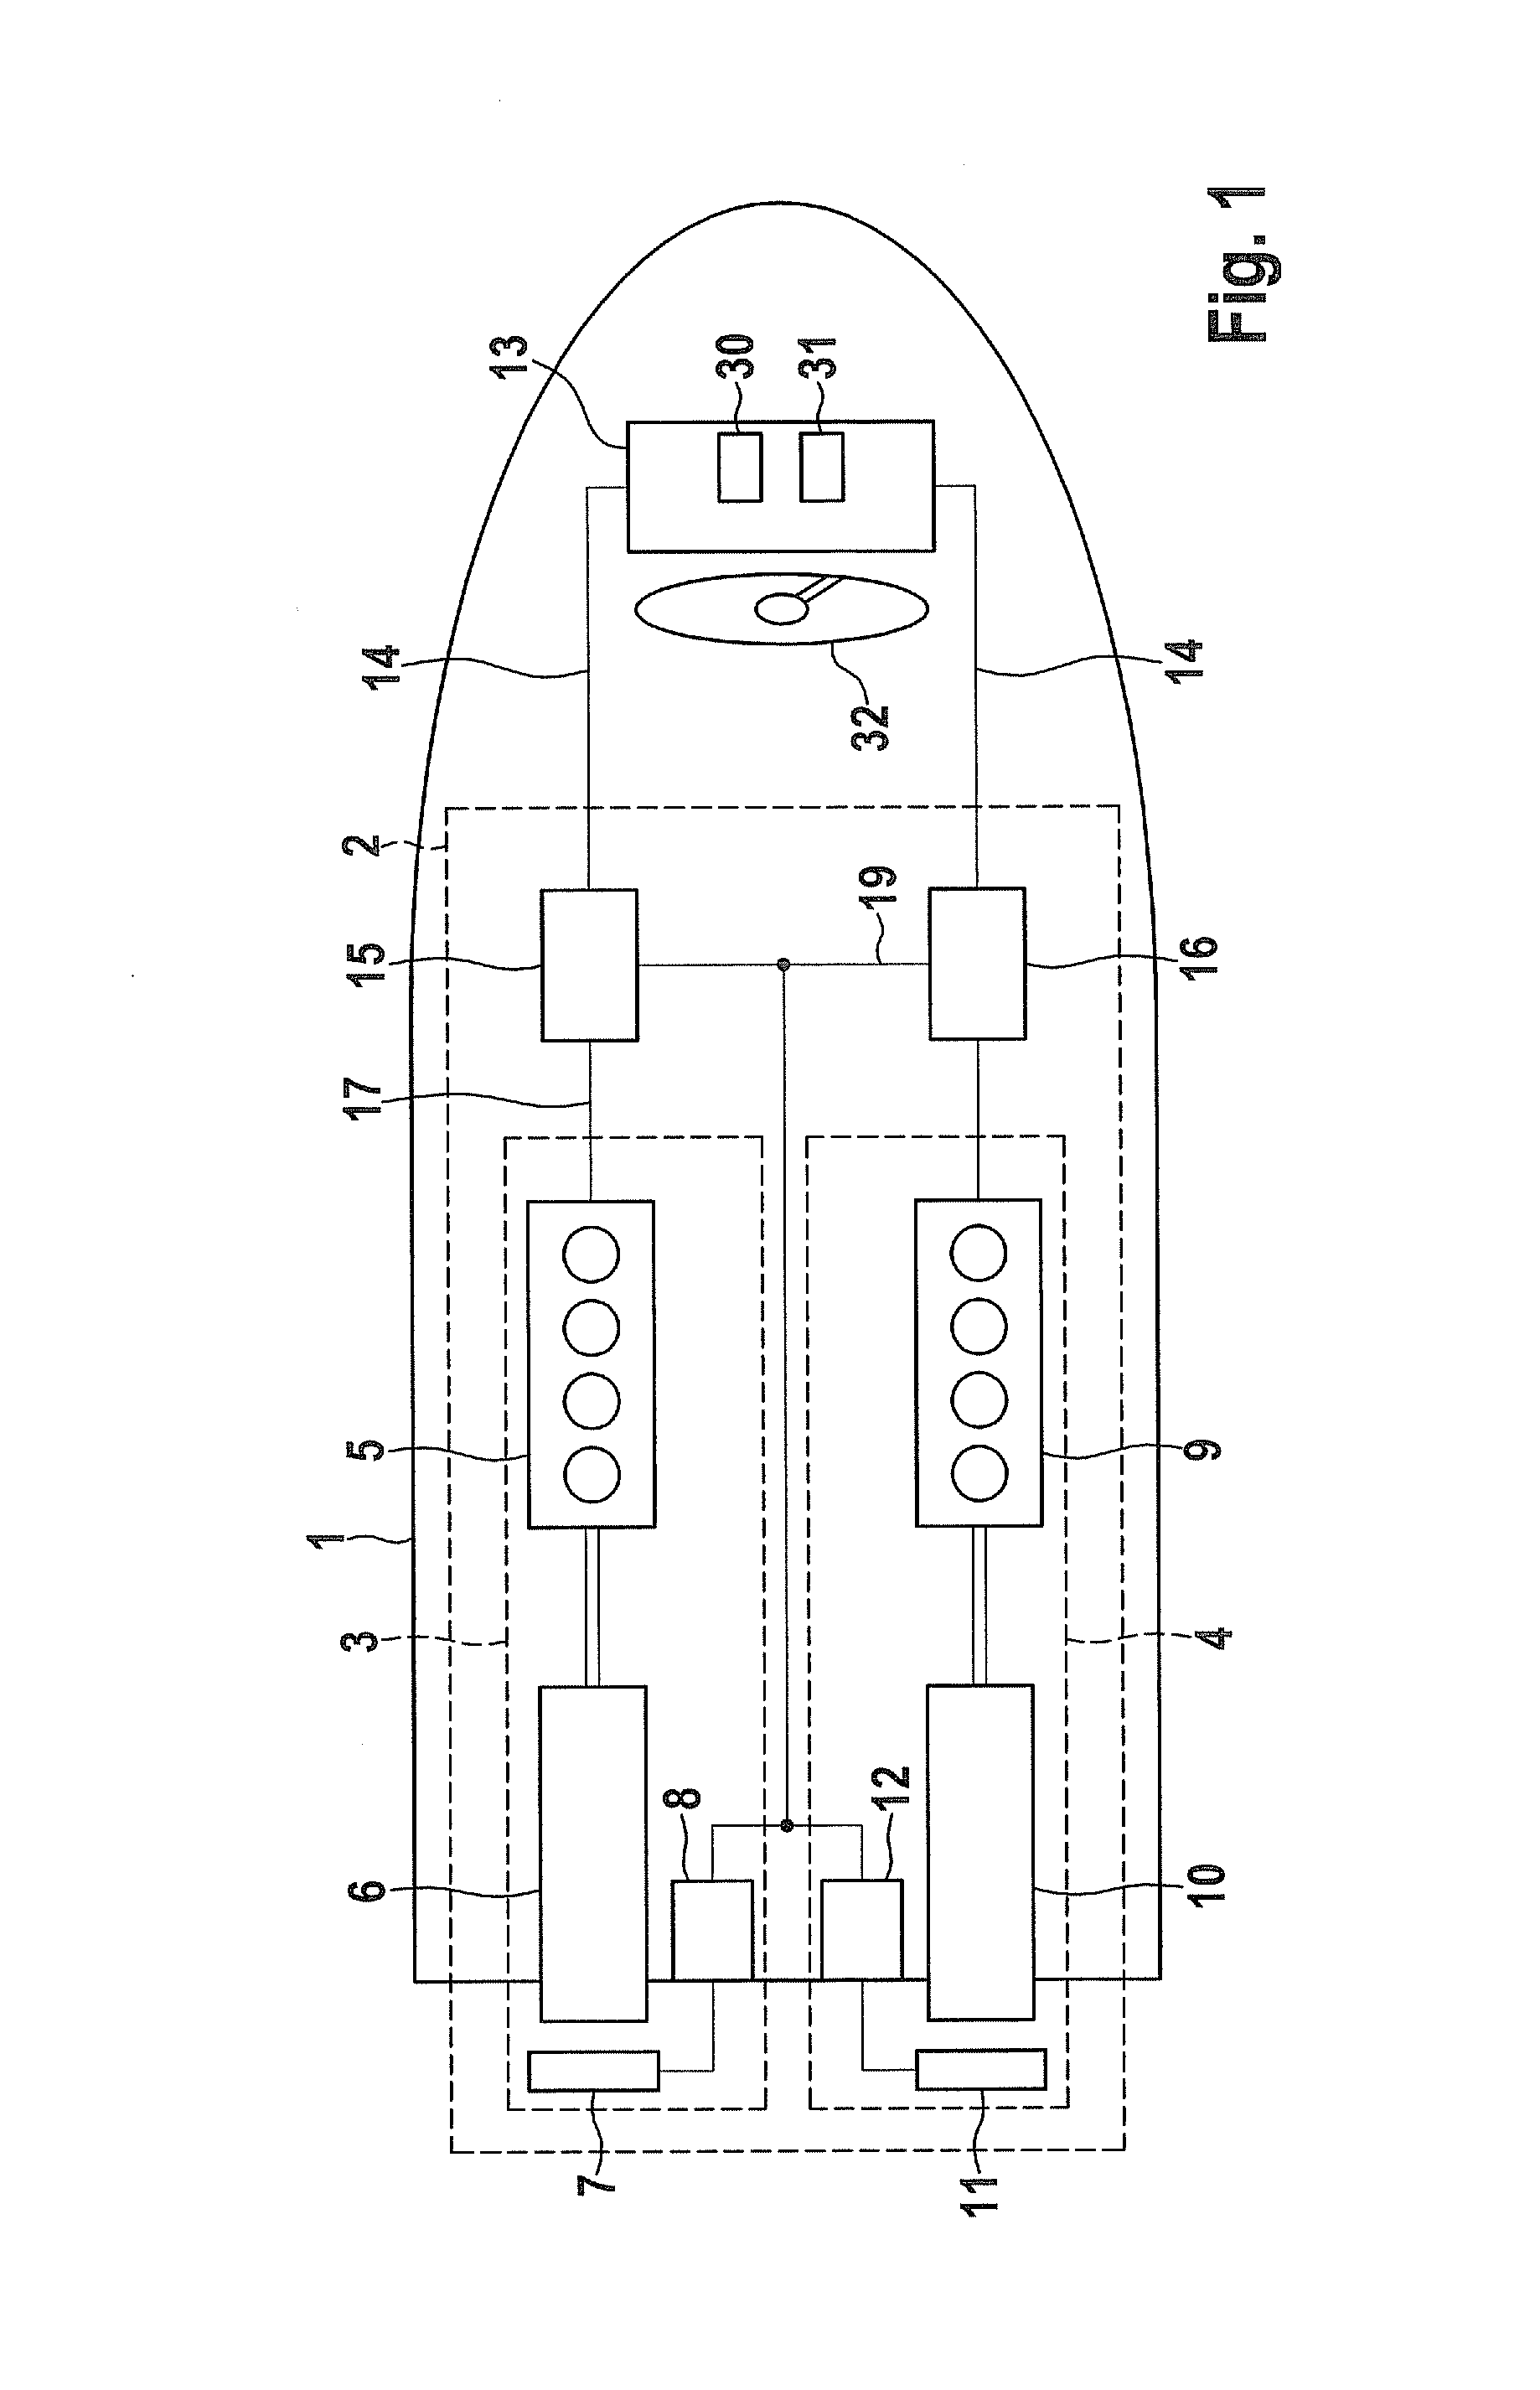 Method for controlling a drive system in a motor boat